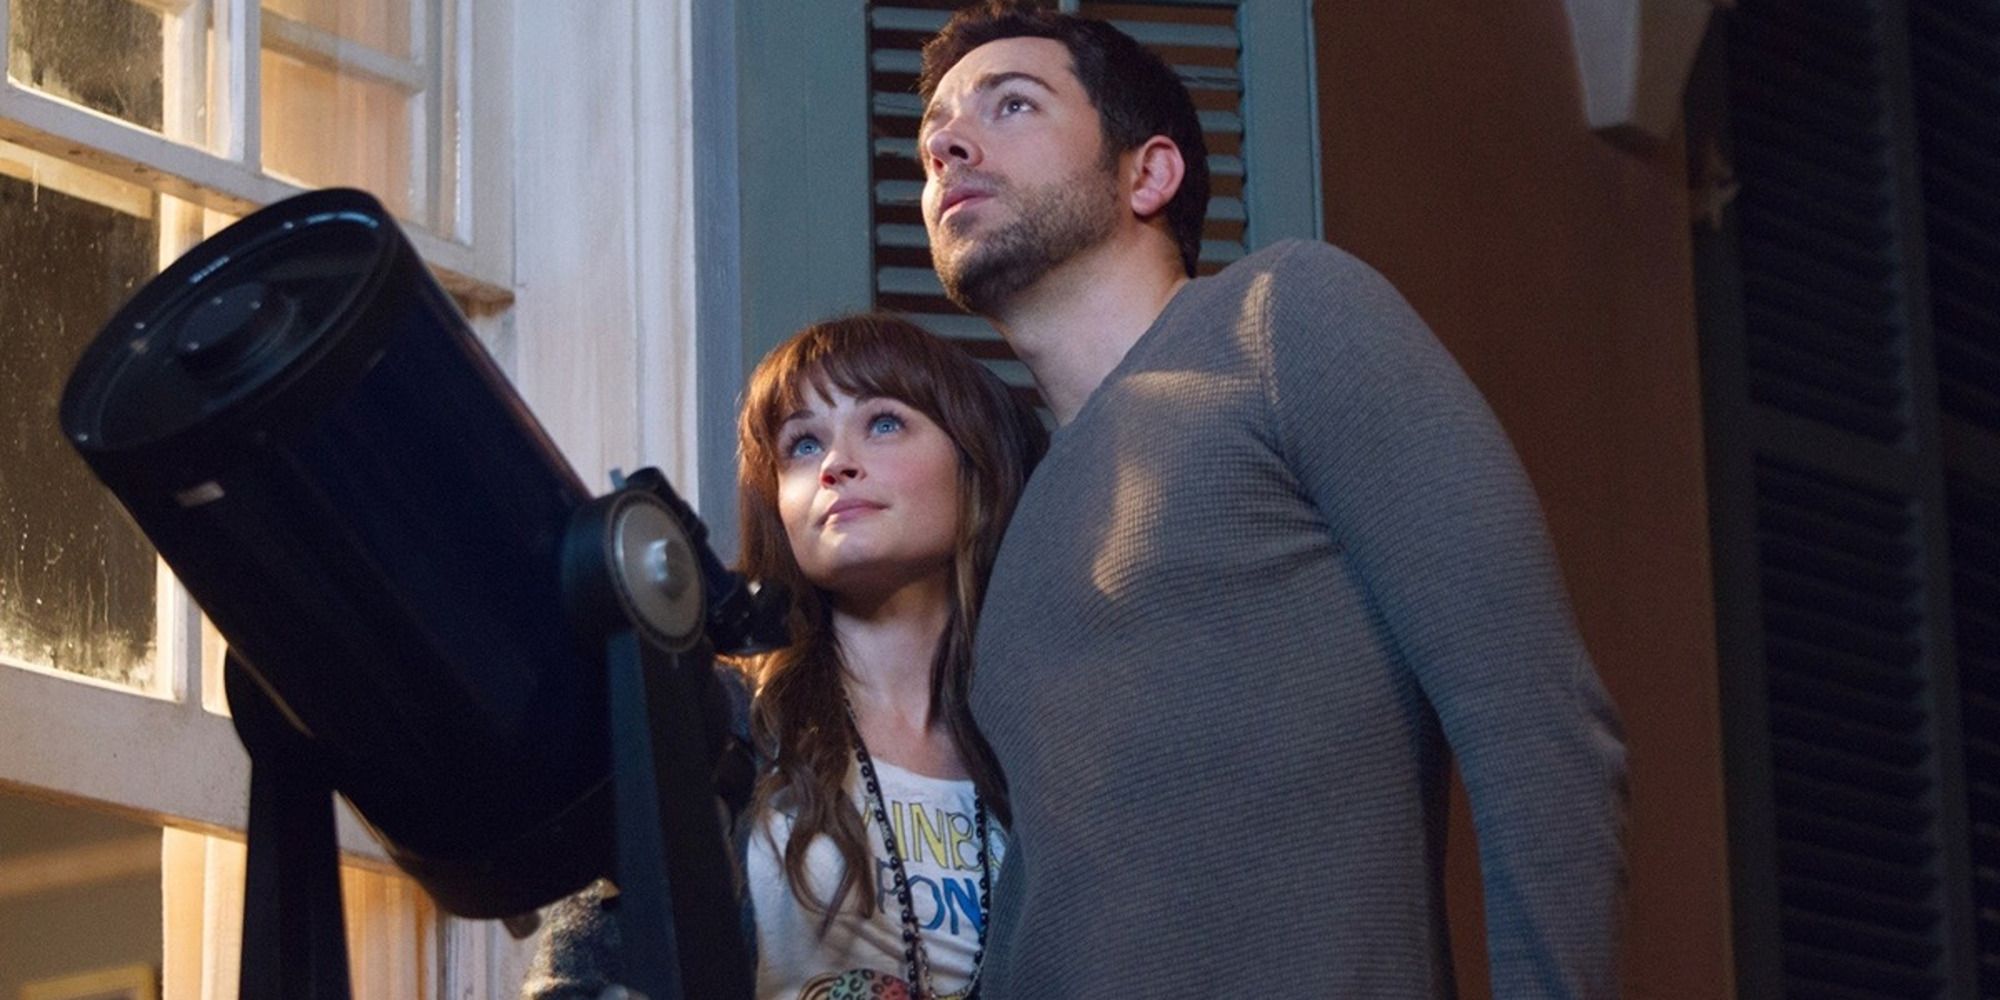 Alexis Bledel and Zachary Levi looking at the night sky in front of a telescope in 'Remember Sunday'